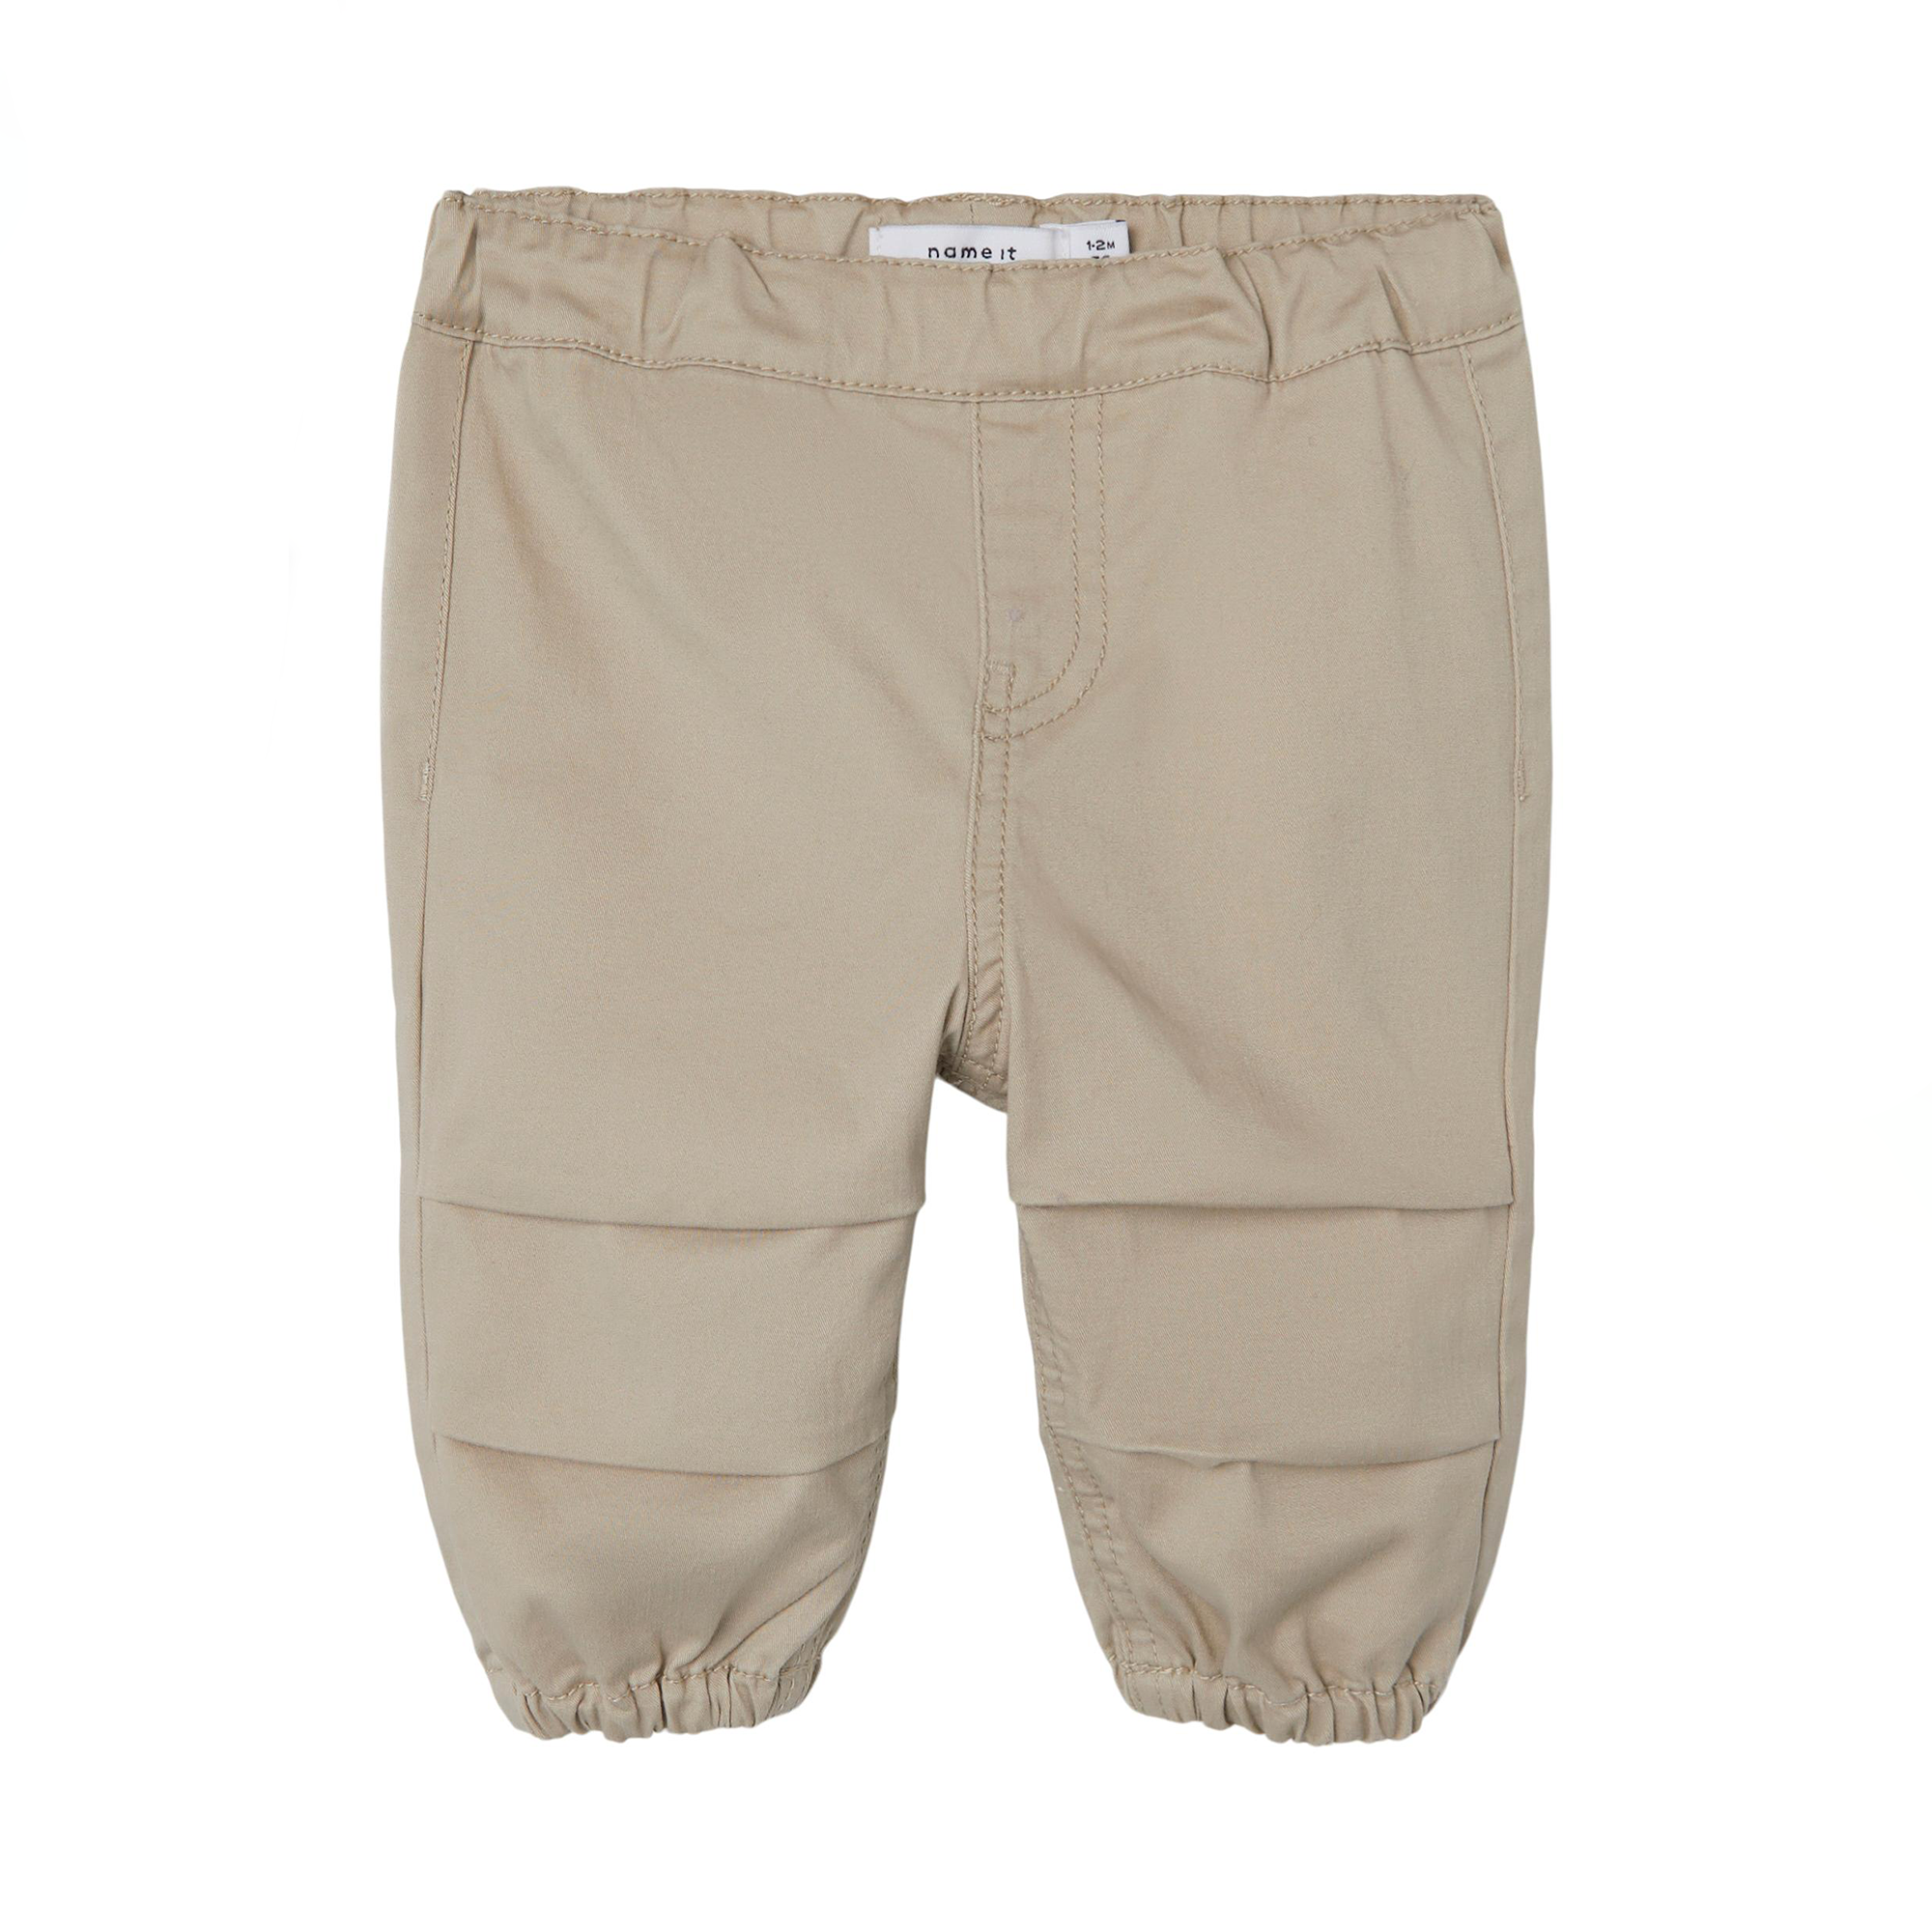 Baggy-Hose Dogs name it Beige M2000585693800 1